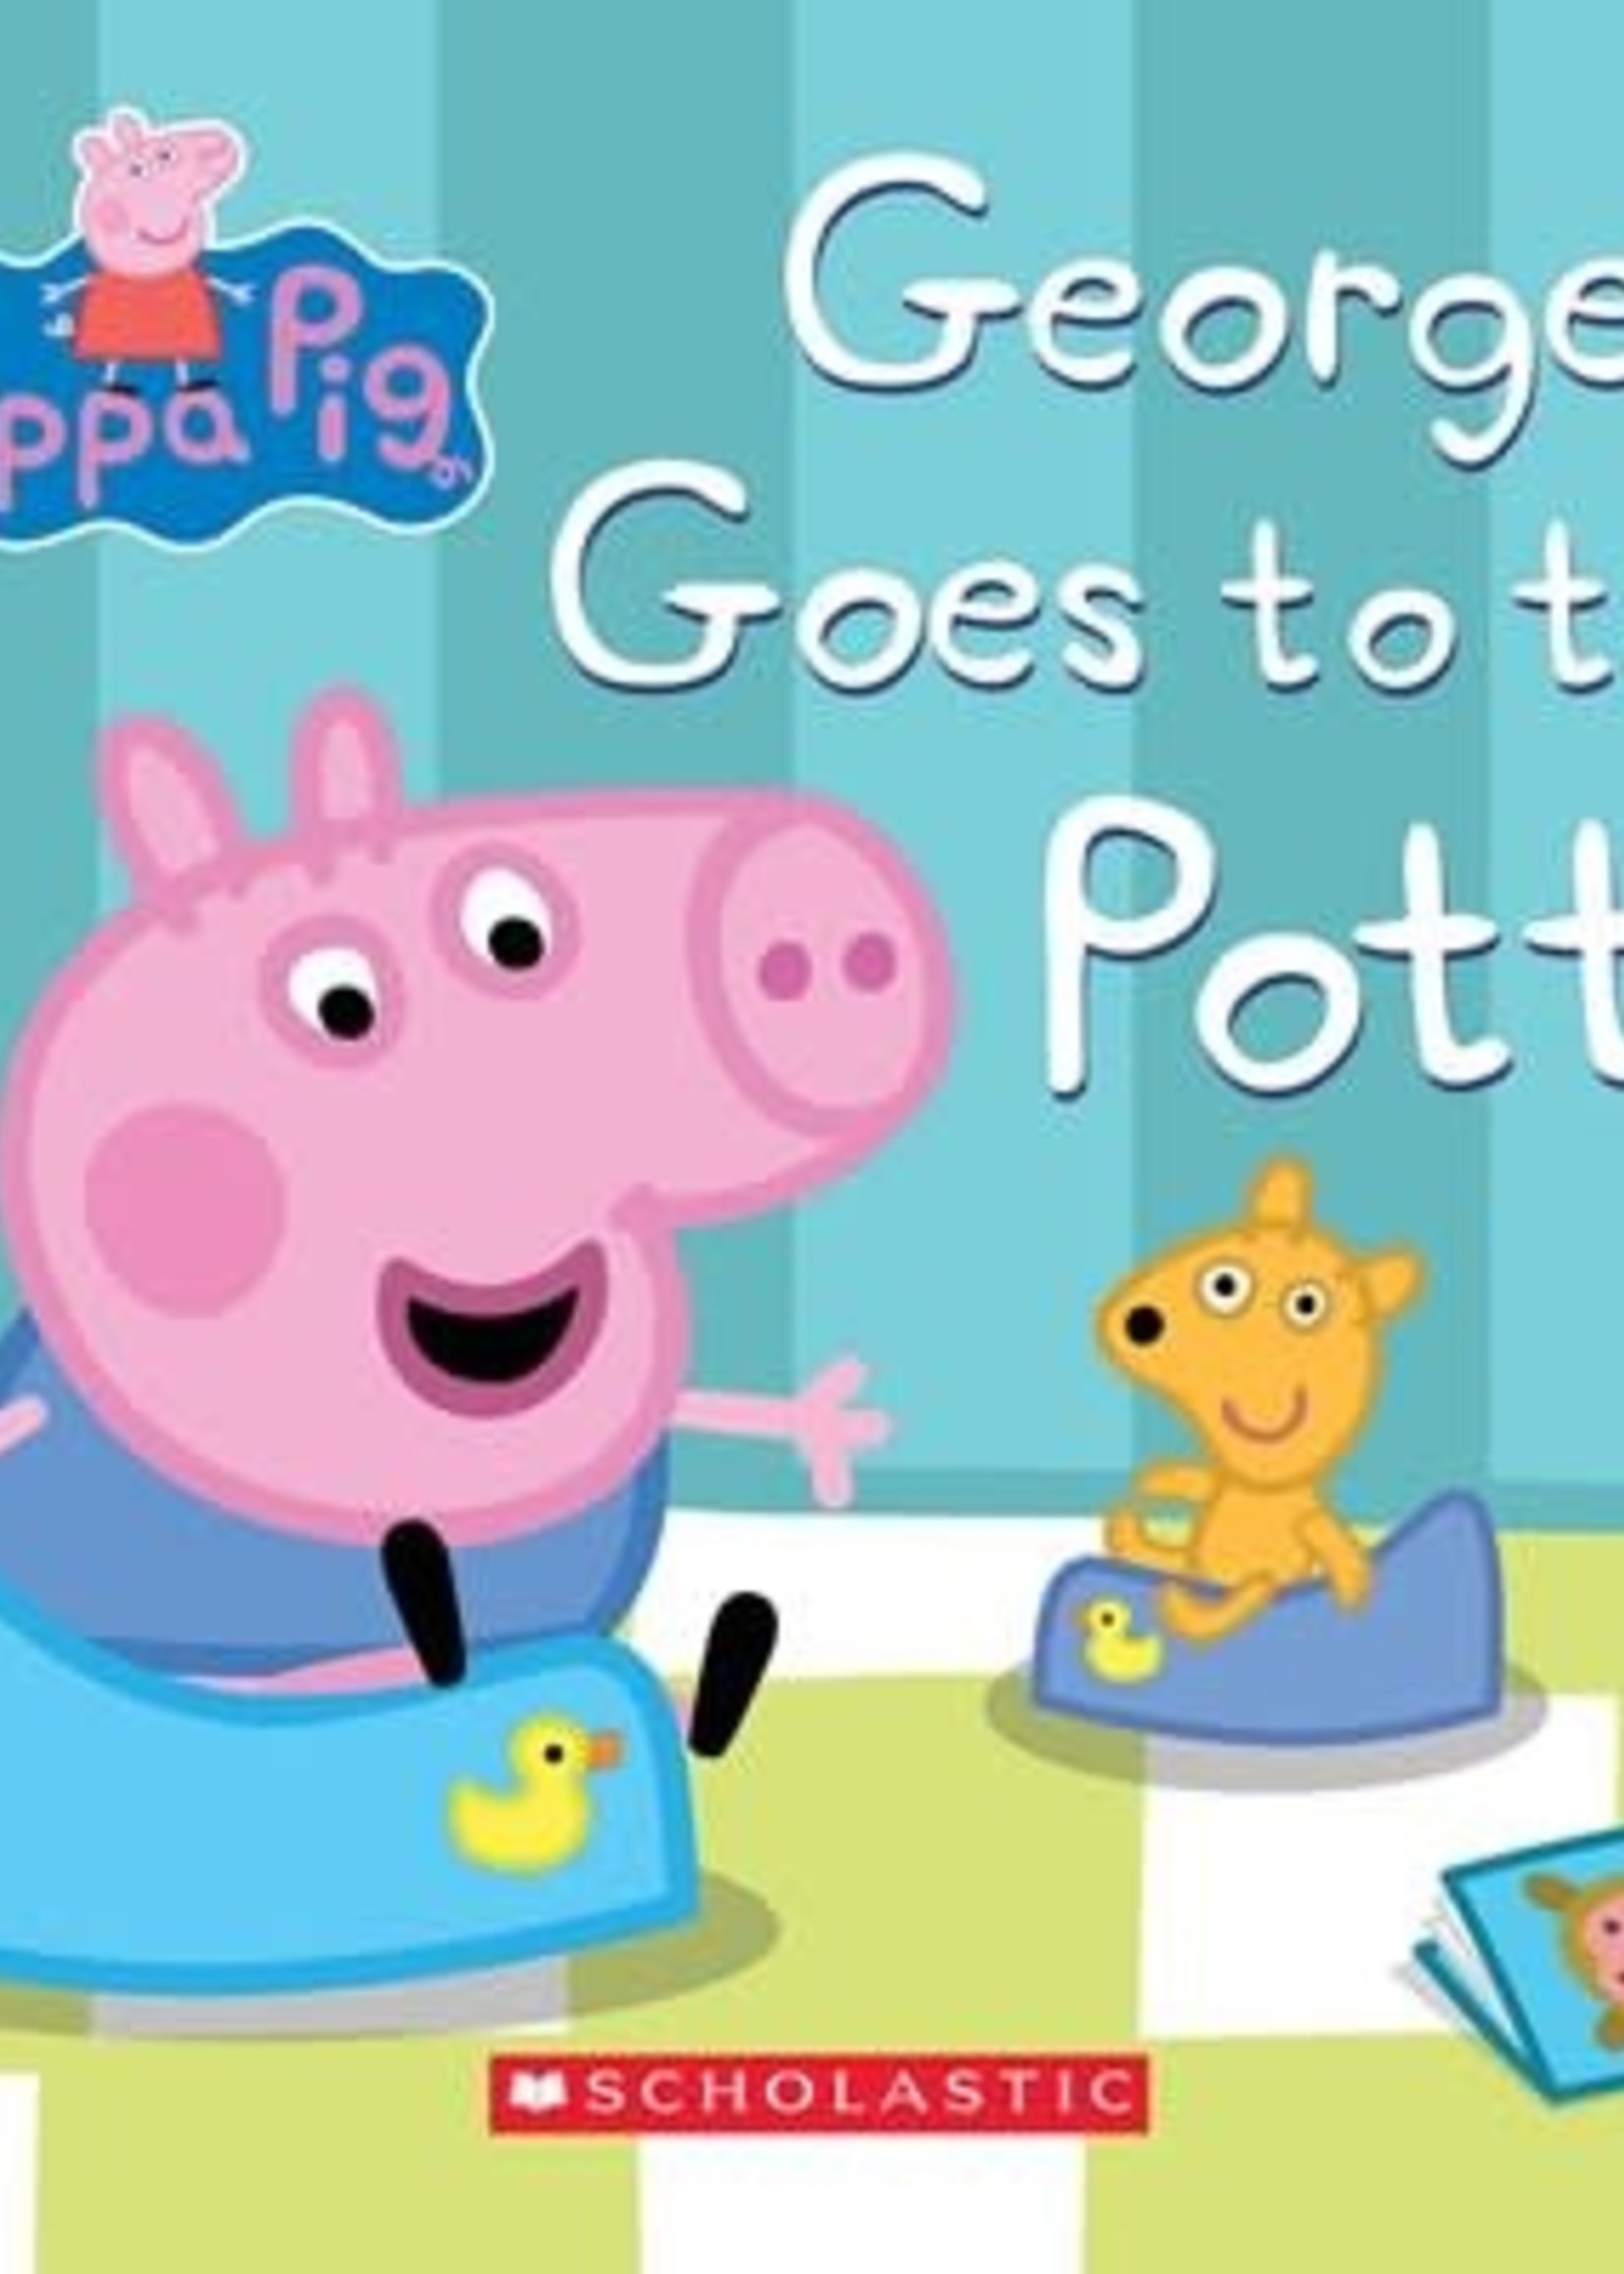 Peppa Pig George Goes to the Potty BB - San Marino Toy and Book Shoppe